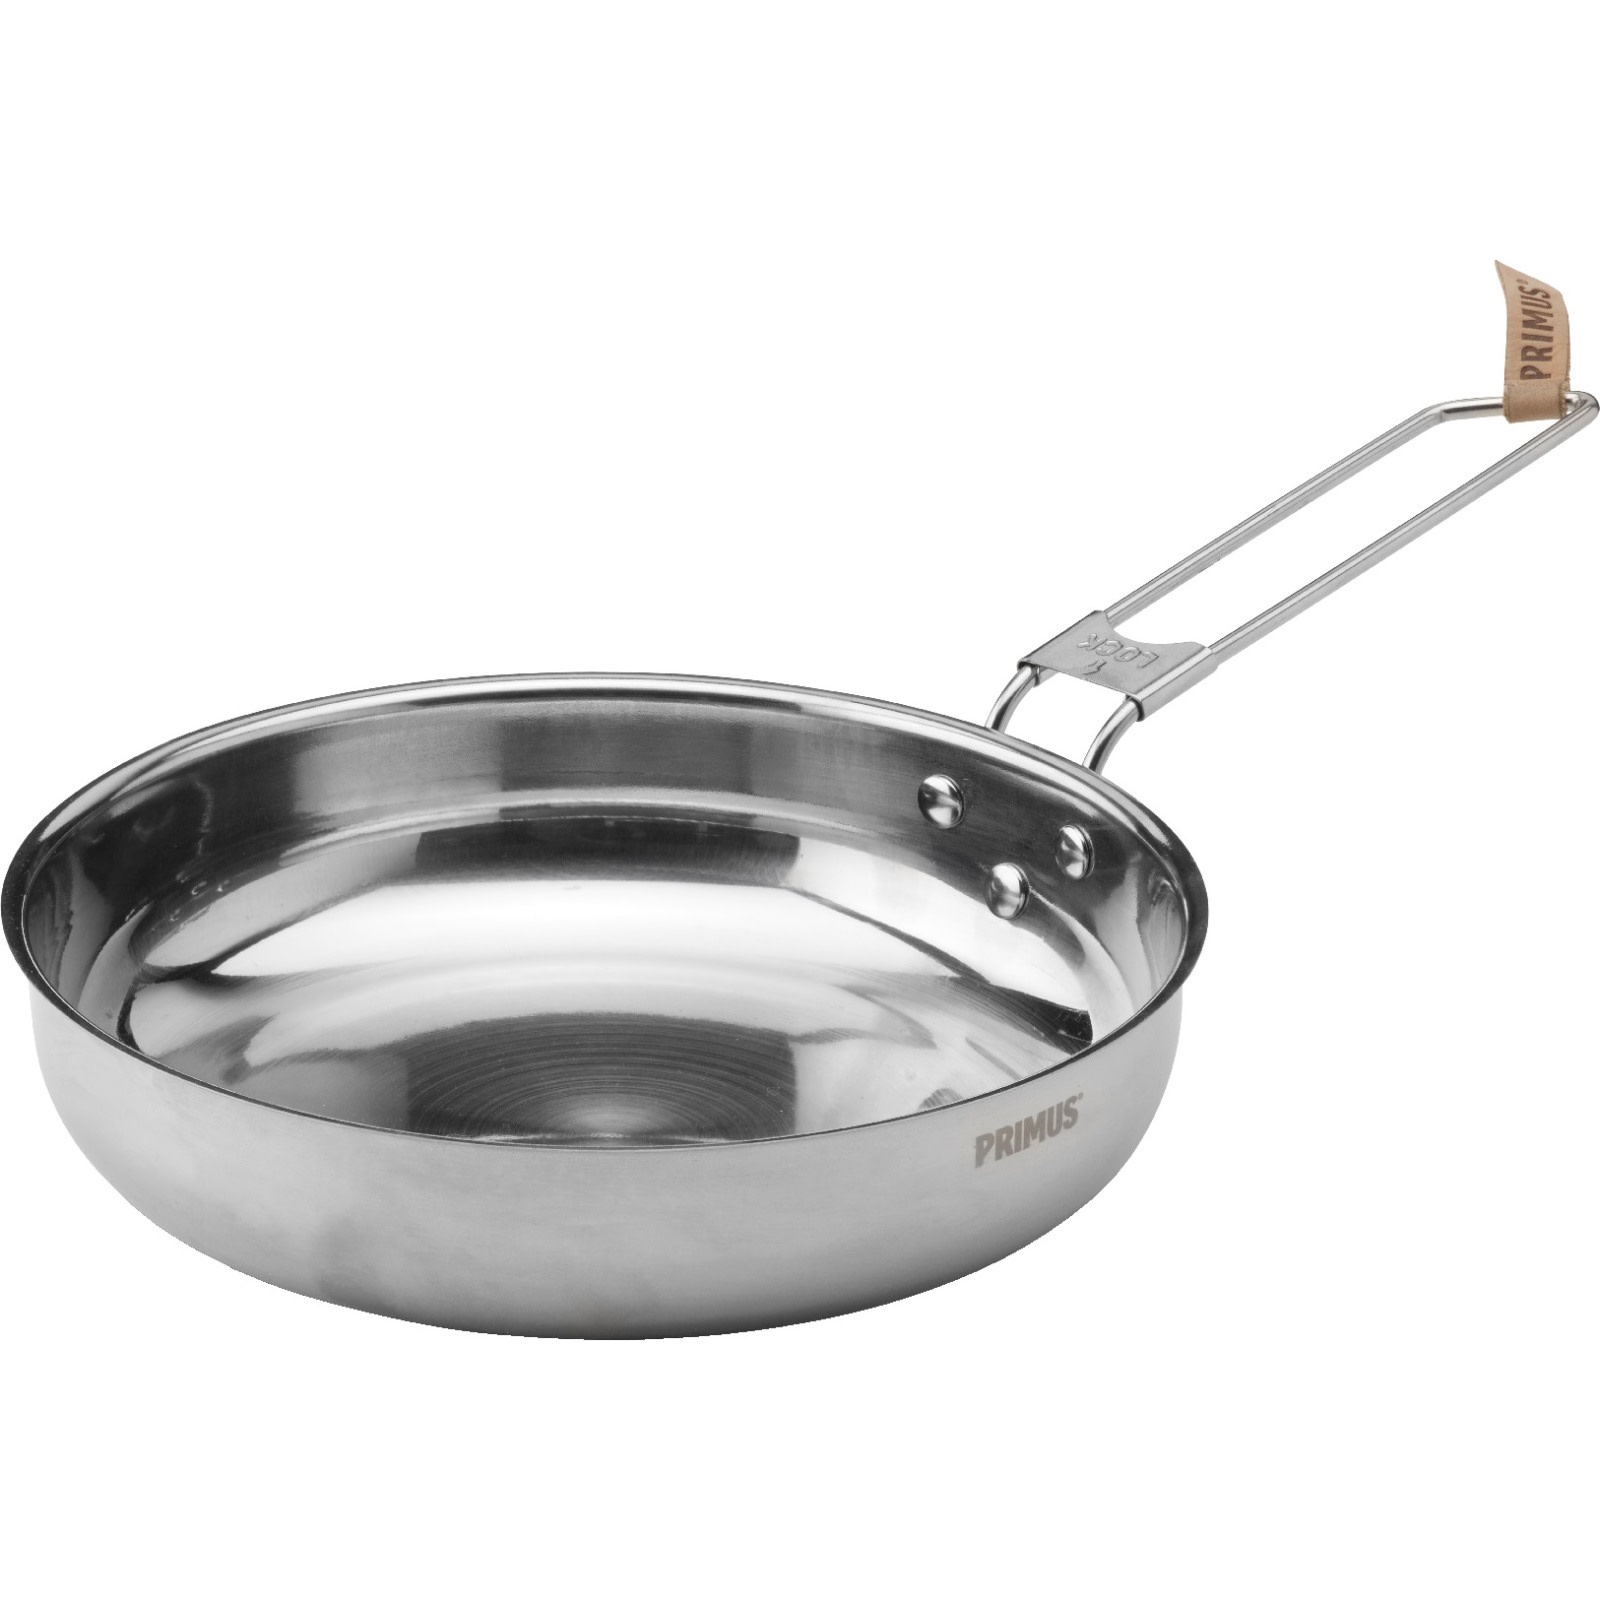 Primus CampFire Frying Pan Stainless Steel 21 cm Silver